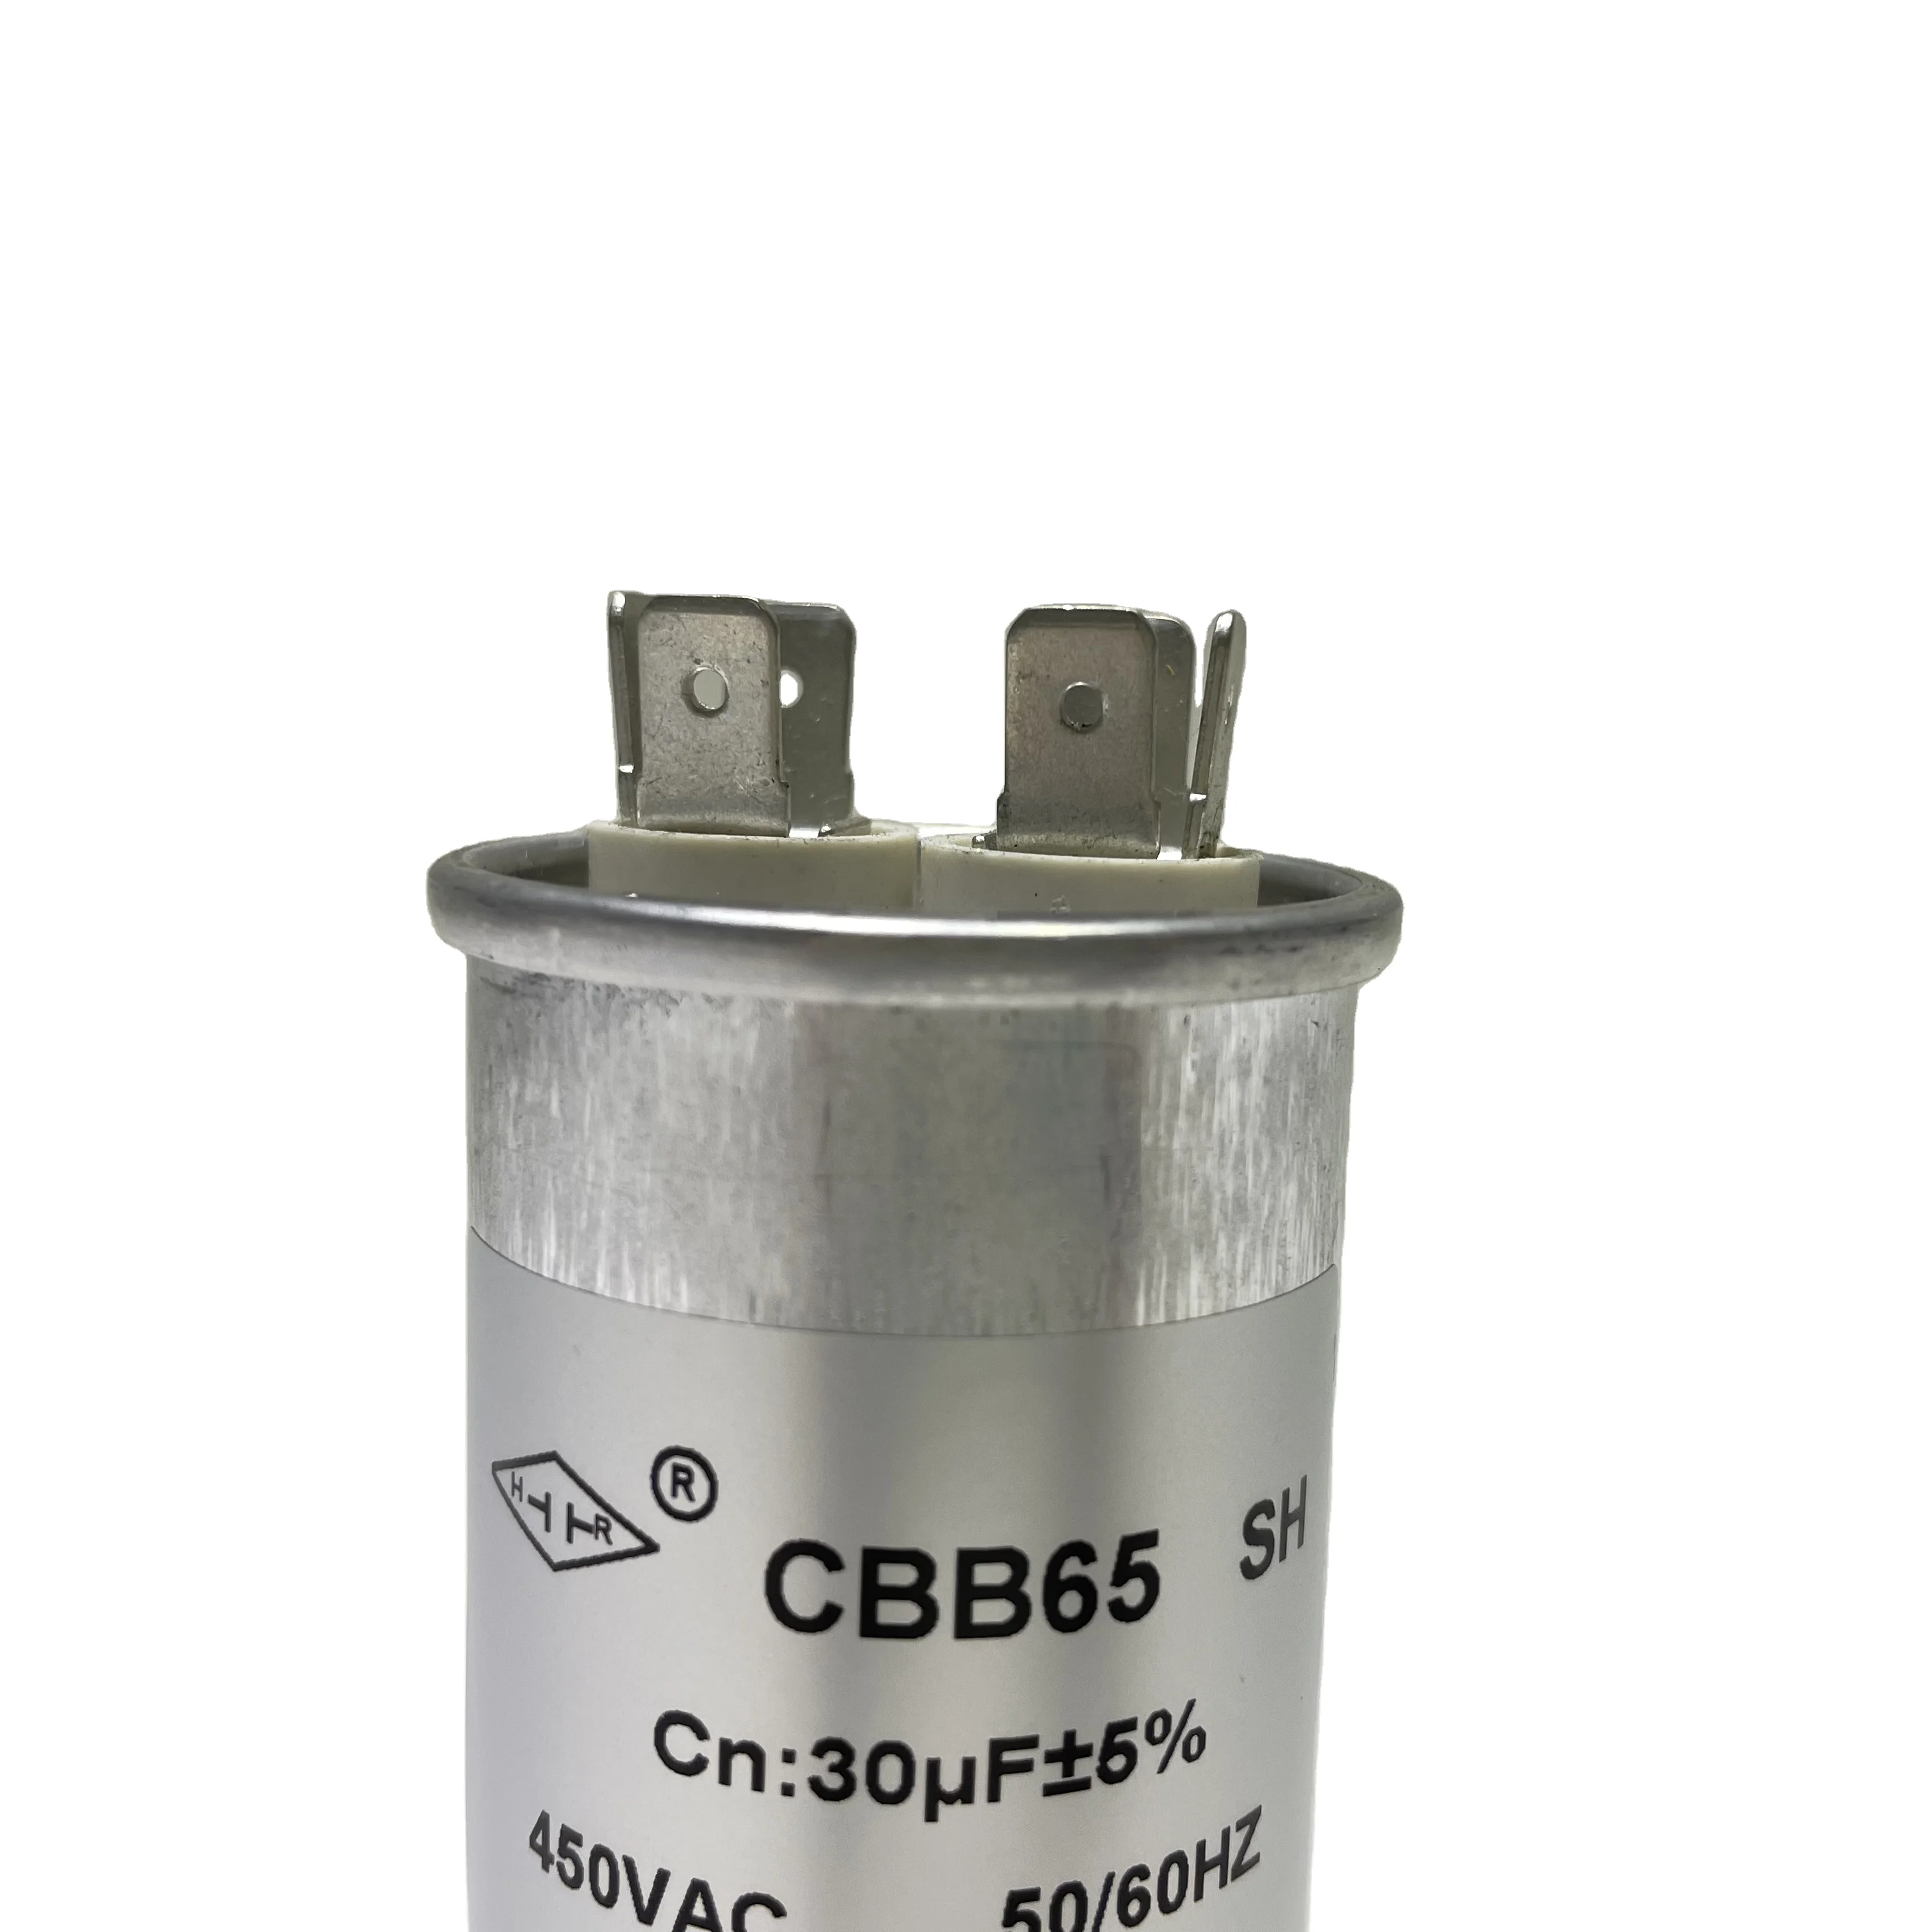 CBB65 capacitors power factor correction intelligent electric low voltge capacitor bank 450V 30uf